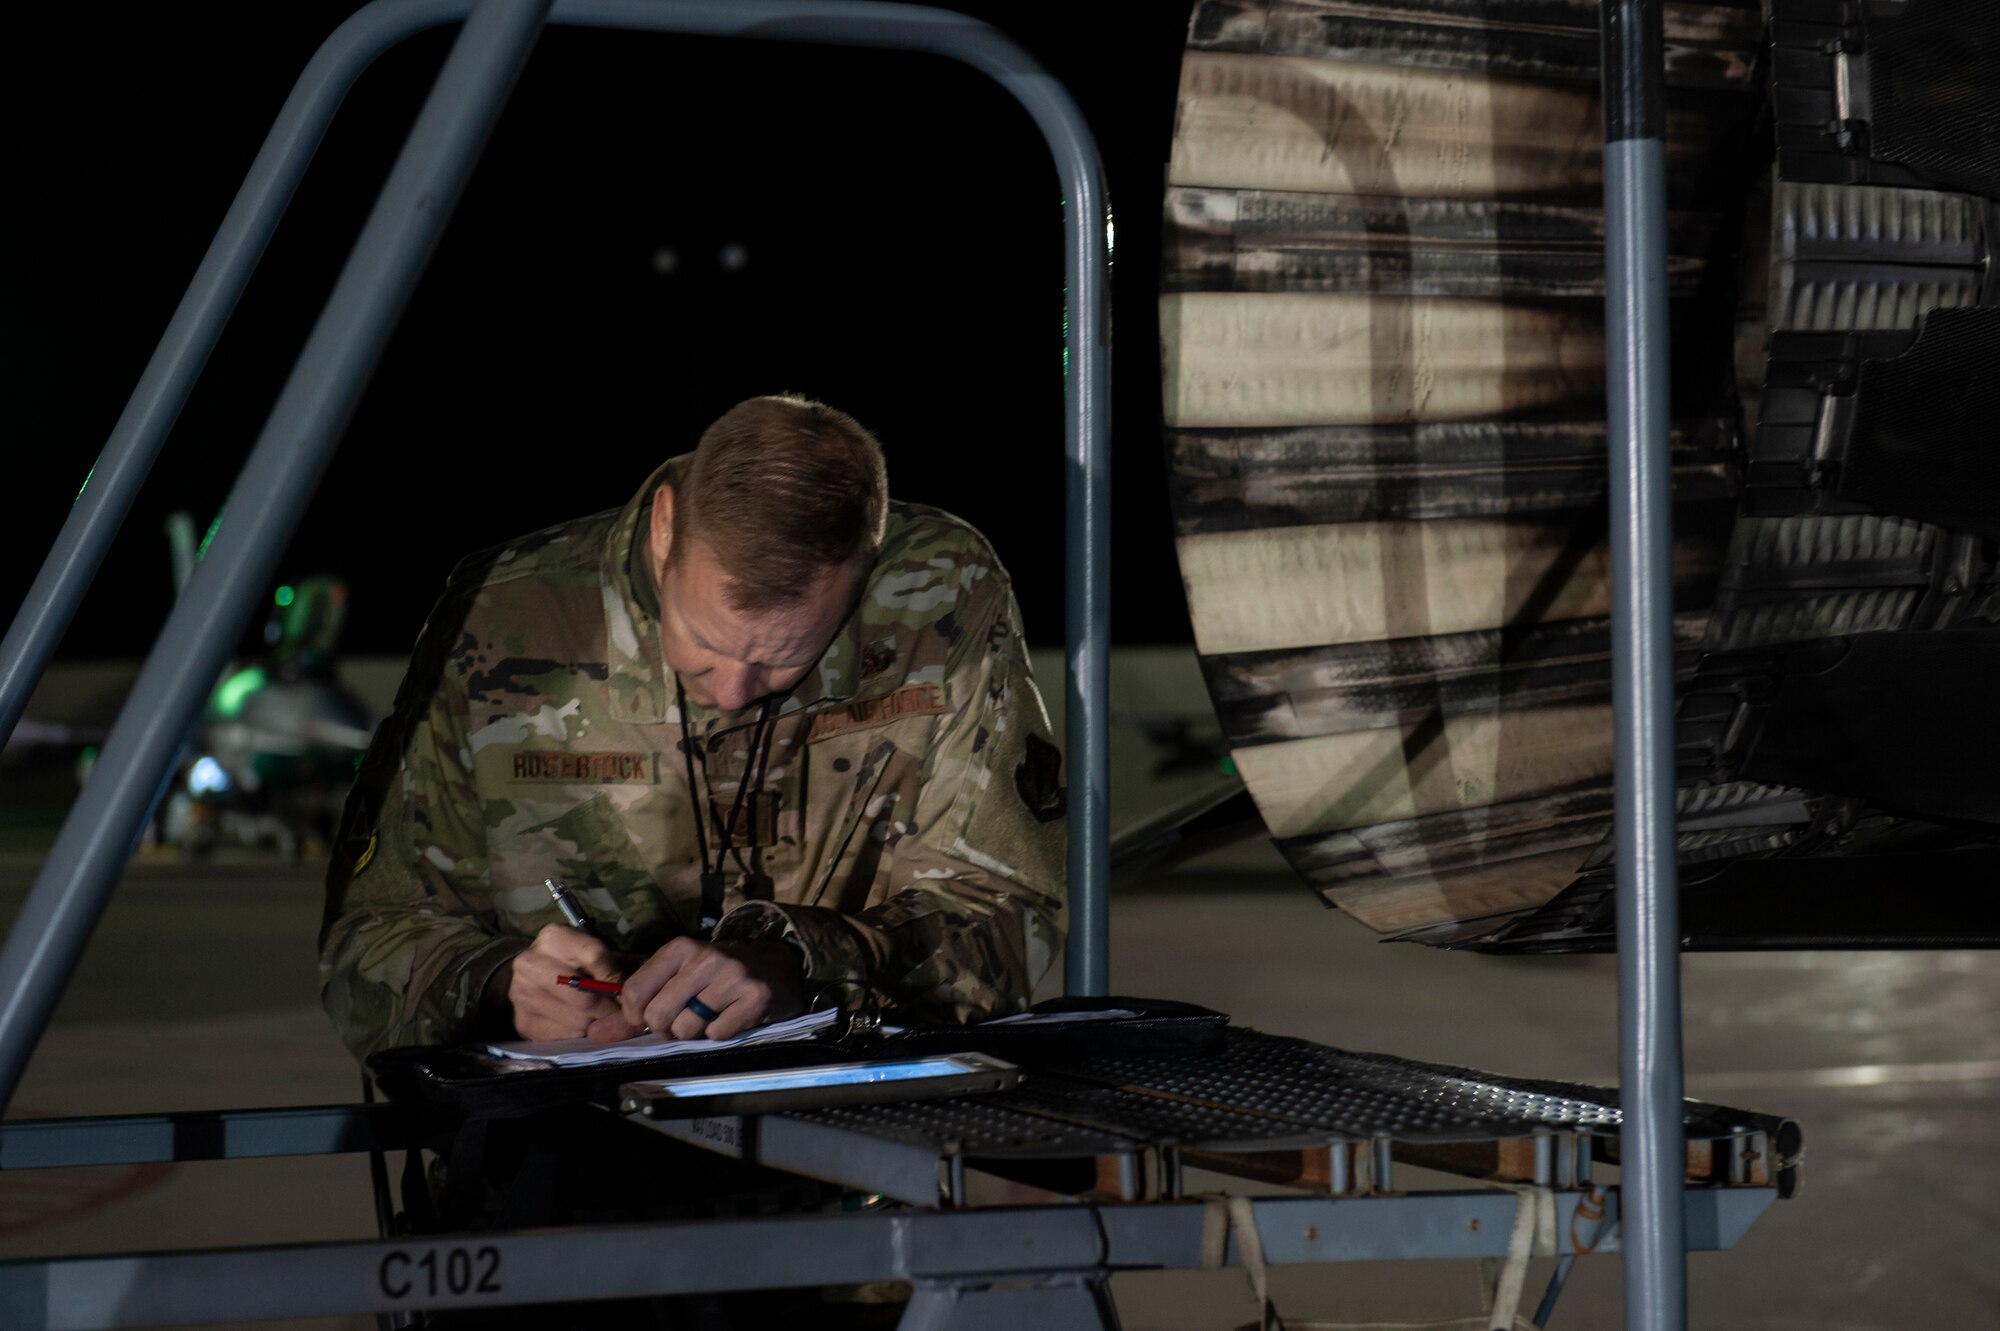 A U.S. Air Force Airman, assigned to the Ohio National Guard’s 180th Fighter Wing, reviews aircraft forms prior to an early morning launch, Oct. 12, 2020, as they depart from the 180FW in Swanton, Ohio, for an Aerospace Expeditionary Force deployment.